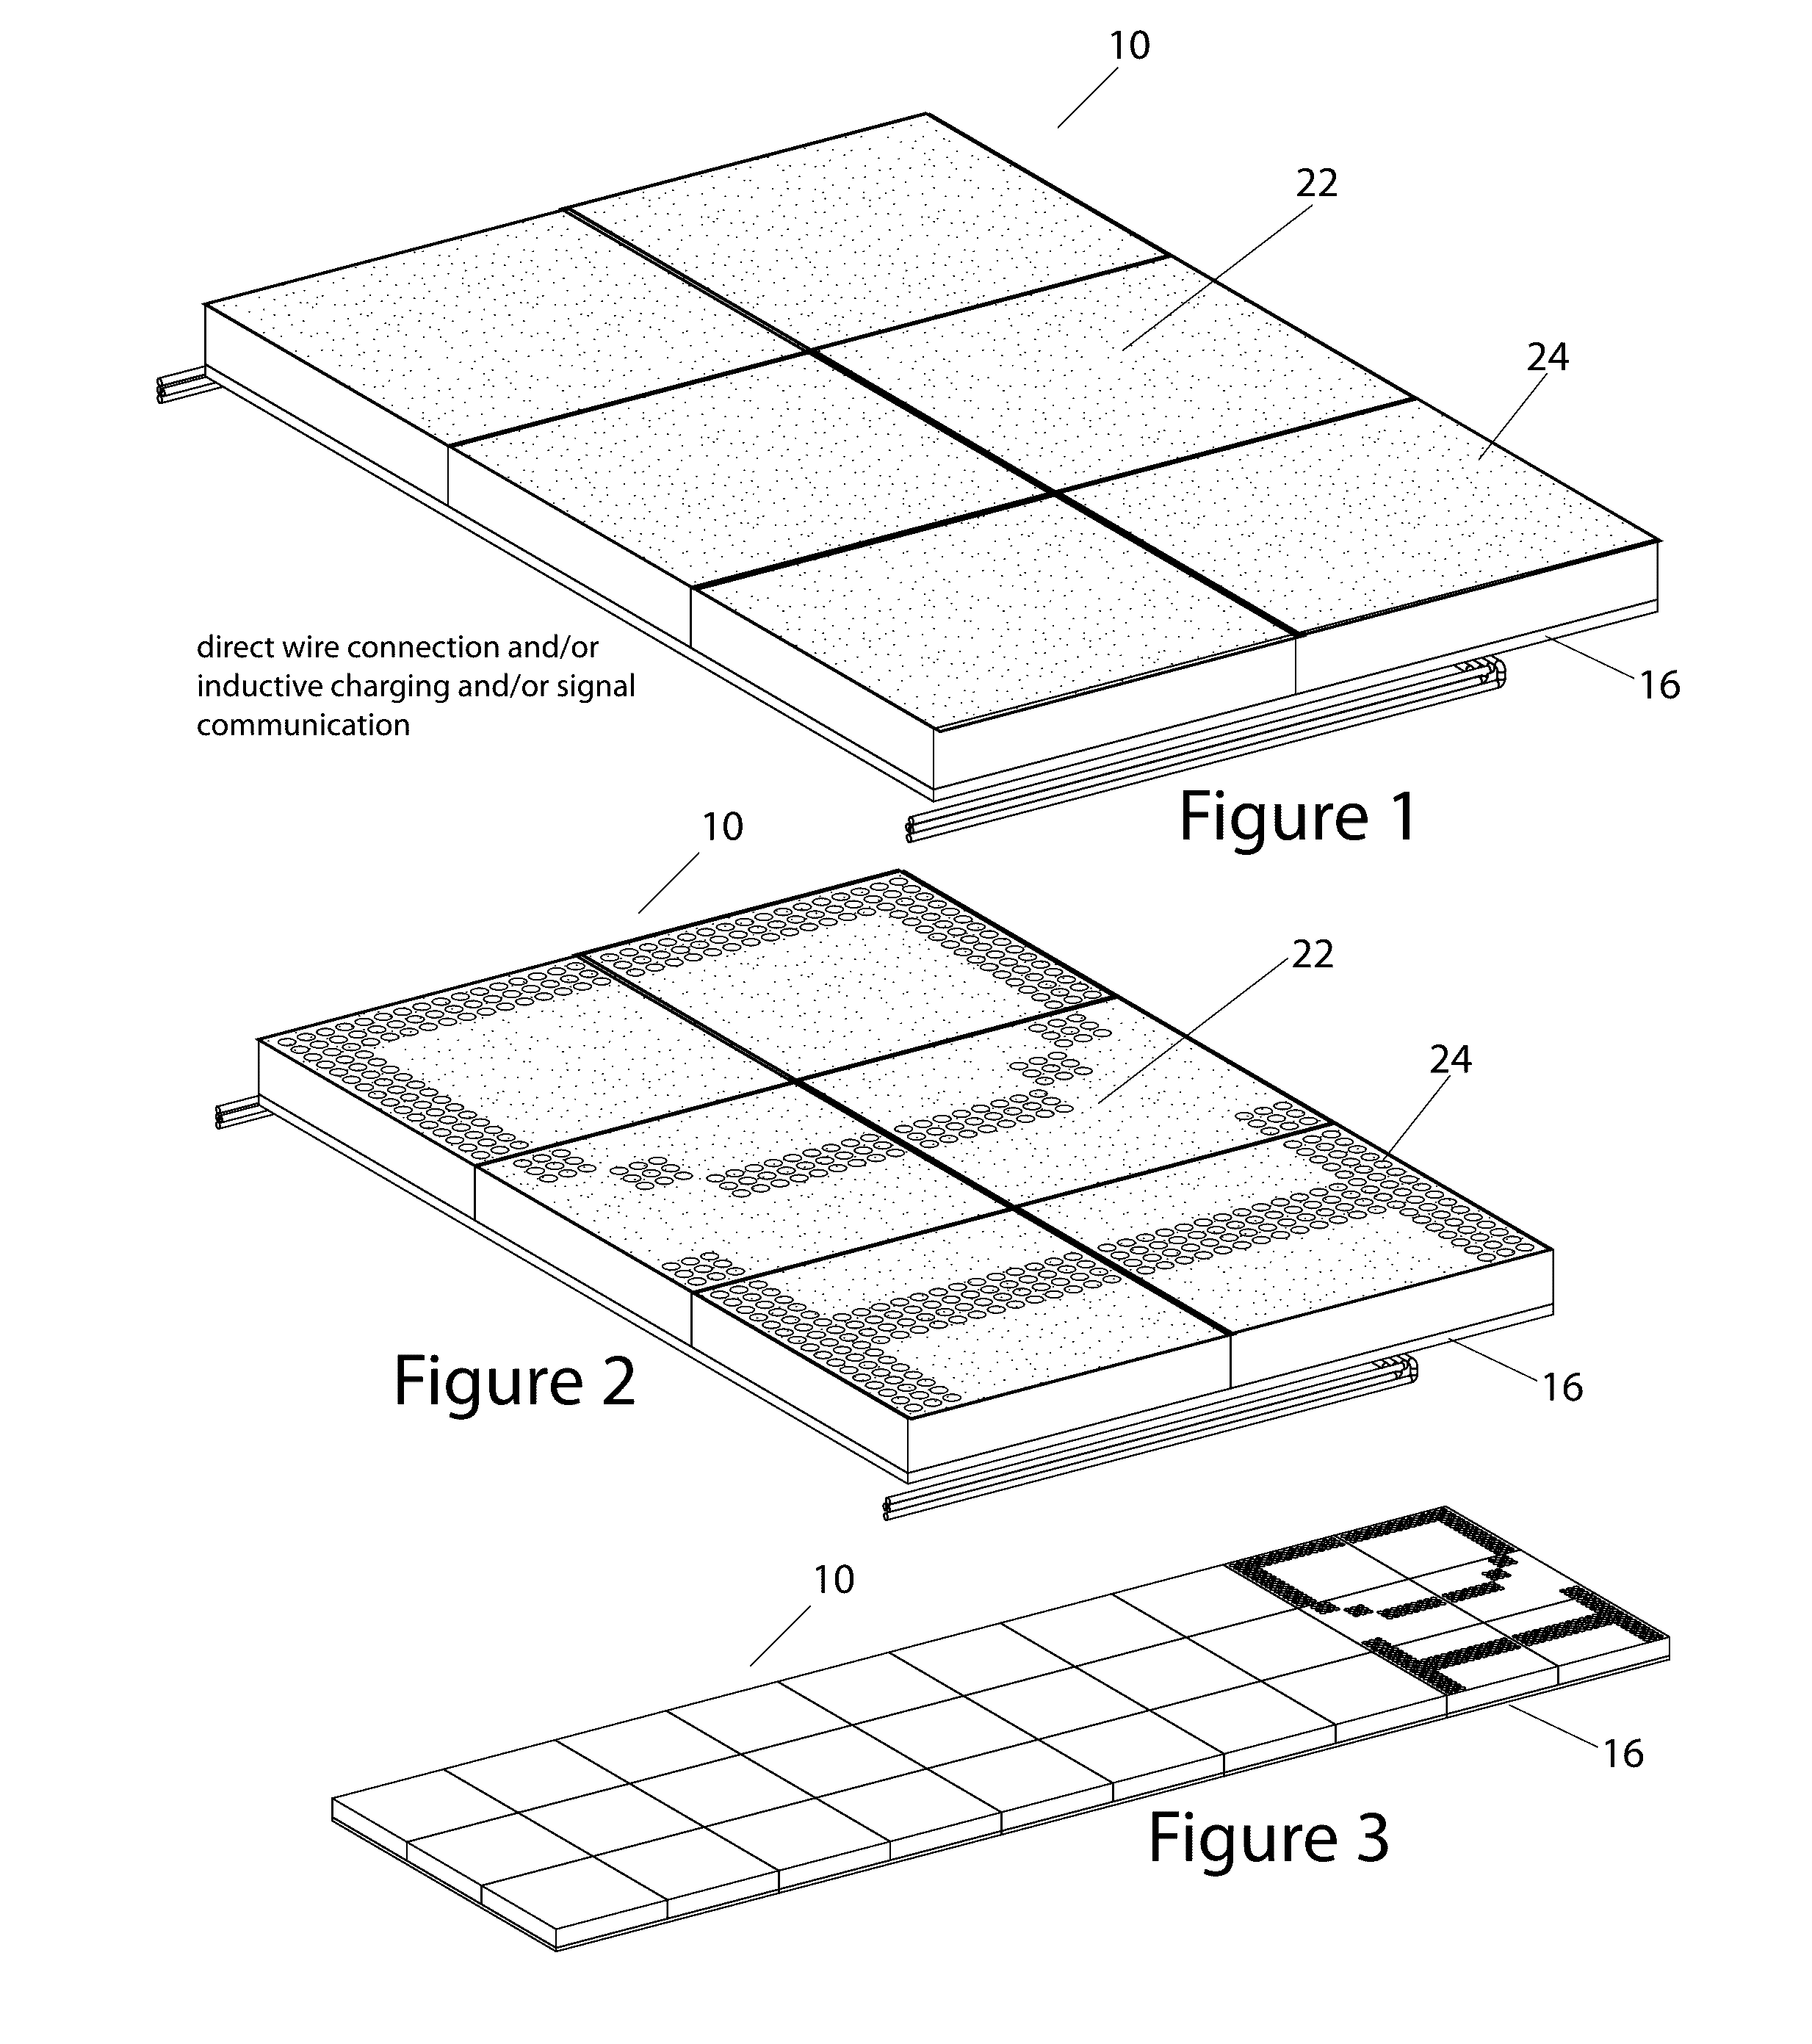 Method and apparatus for encapsulating a light source